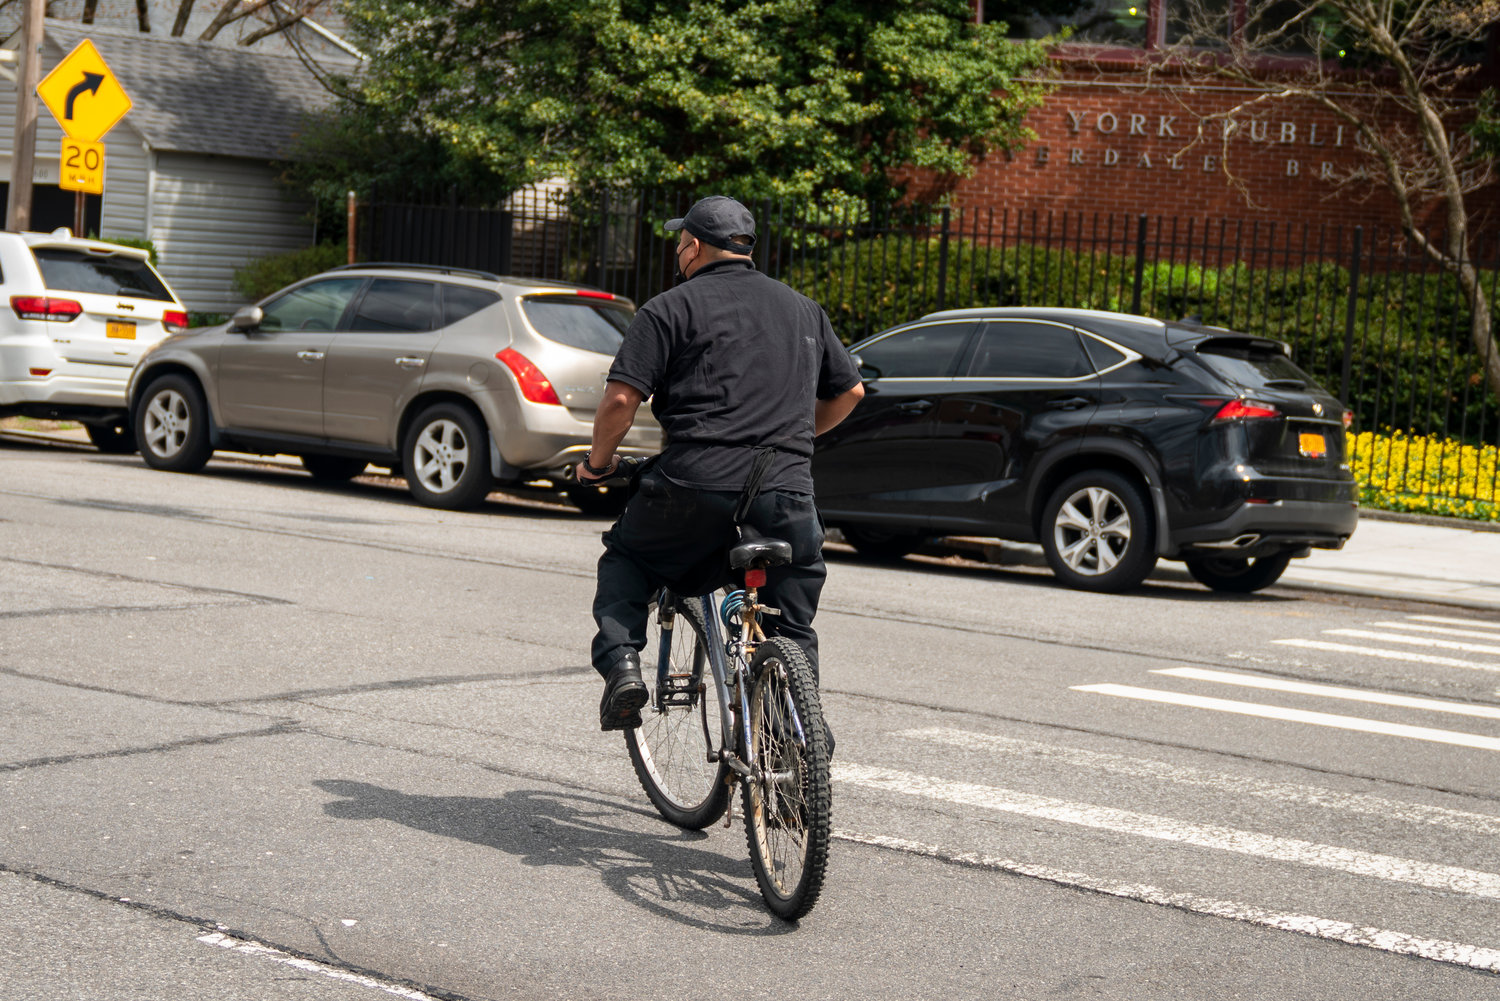 The proposal to add bicycle lanes to Mosholu Avenue was part of the city transportation department’s plan to slow traffic along the drag. However, some neighbors were less receptive to the idea — including dozens of Mosholu businesses claiming bicycle lanes would disrupt their already fraught clientele. Only two members of Community Board 8’s traffic and transportation committee ultimately voted in favor of the bike lanes.